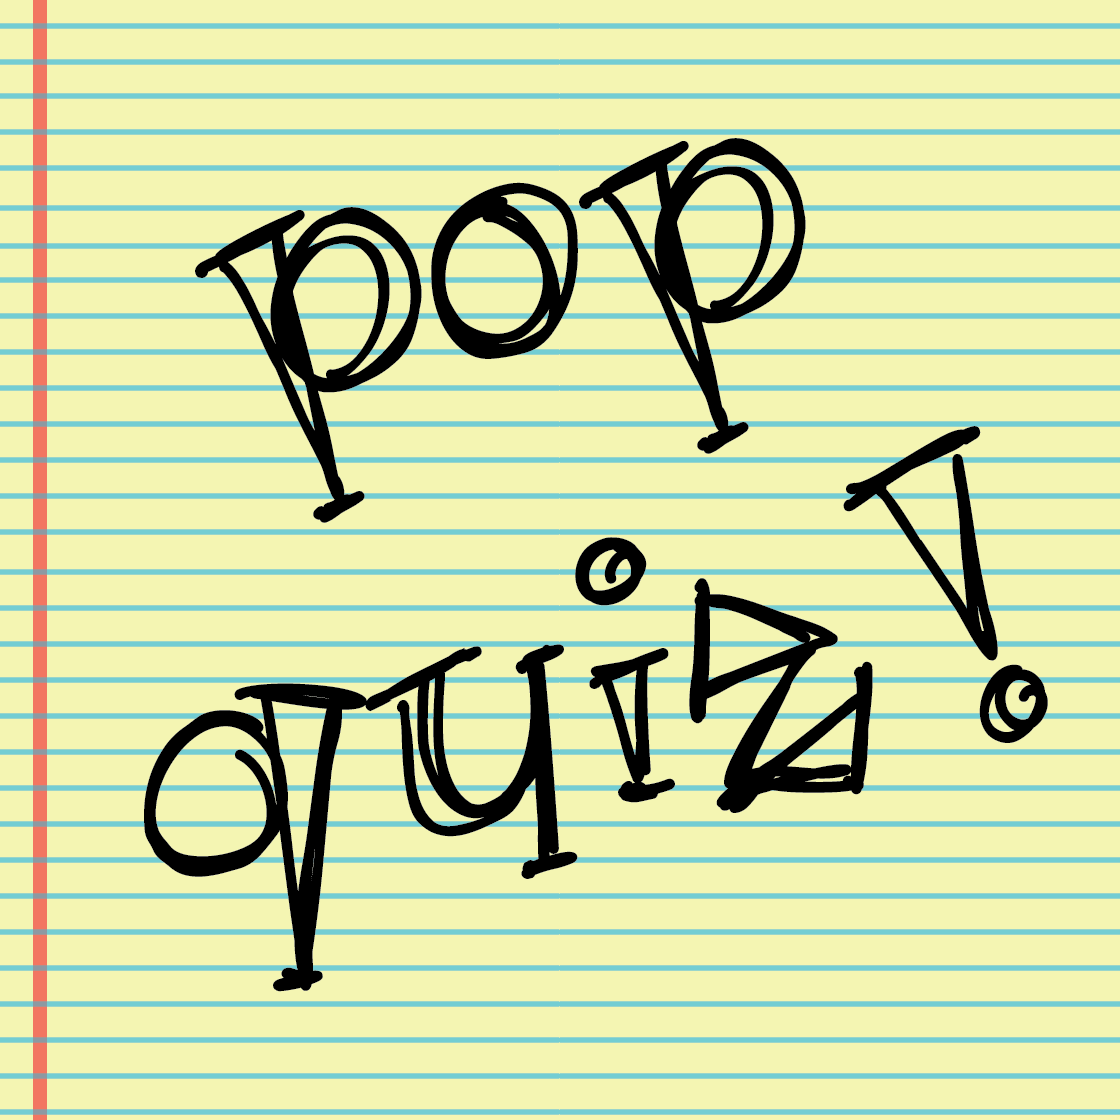 PopQuiz! is an entertaining podcast discussing pop culture.  We ask the tough questions to test your knowledge on the latest news in movies, TV, and music!